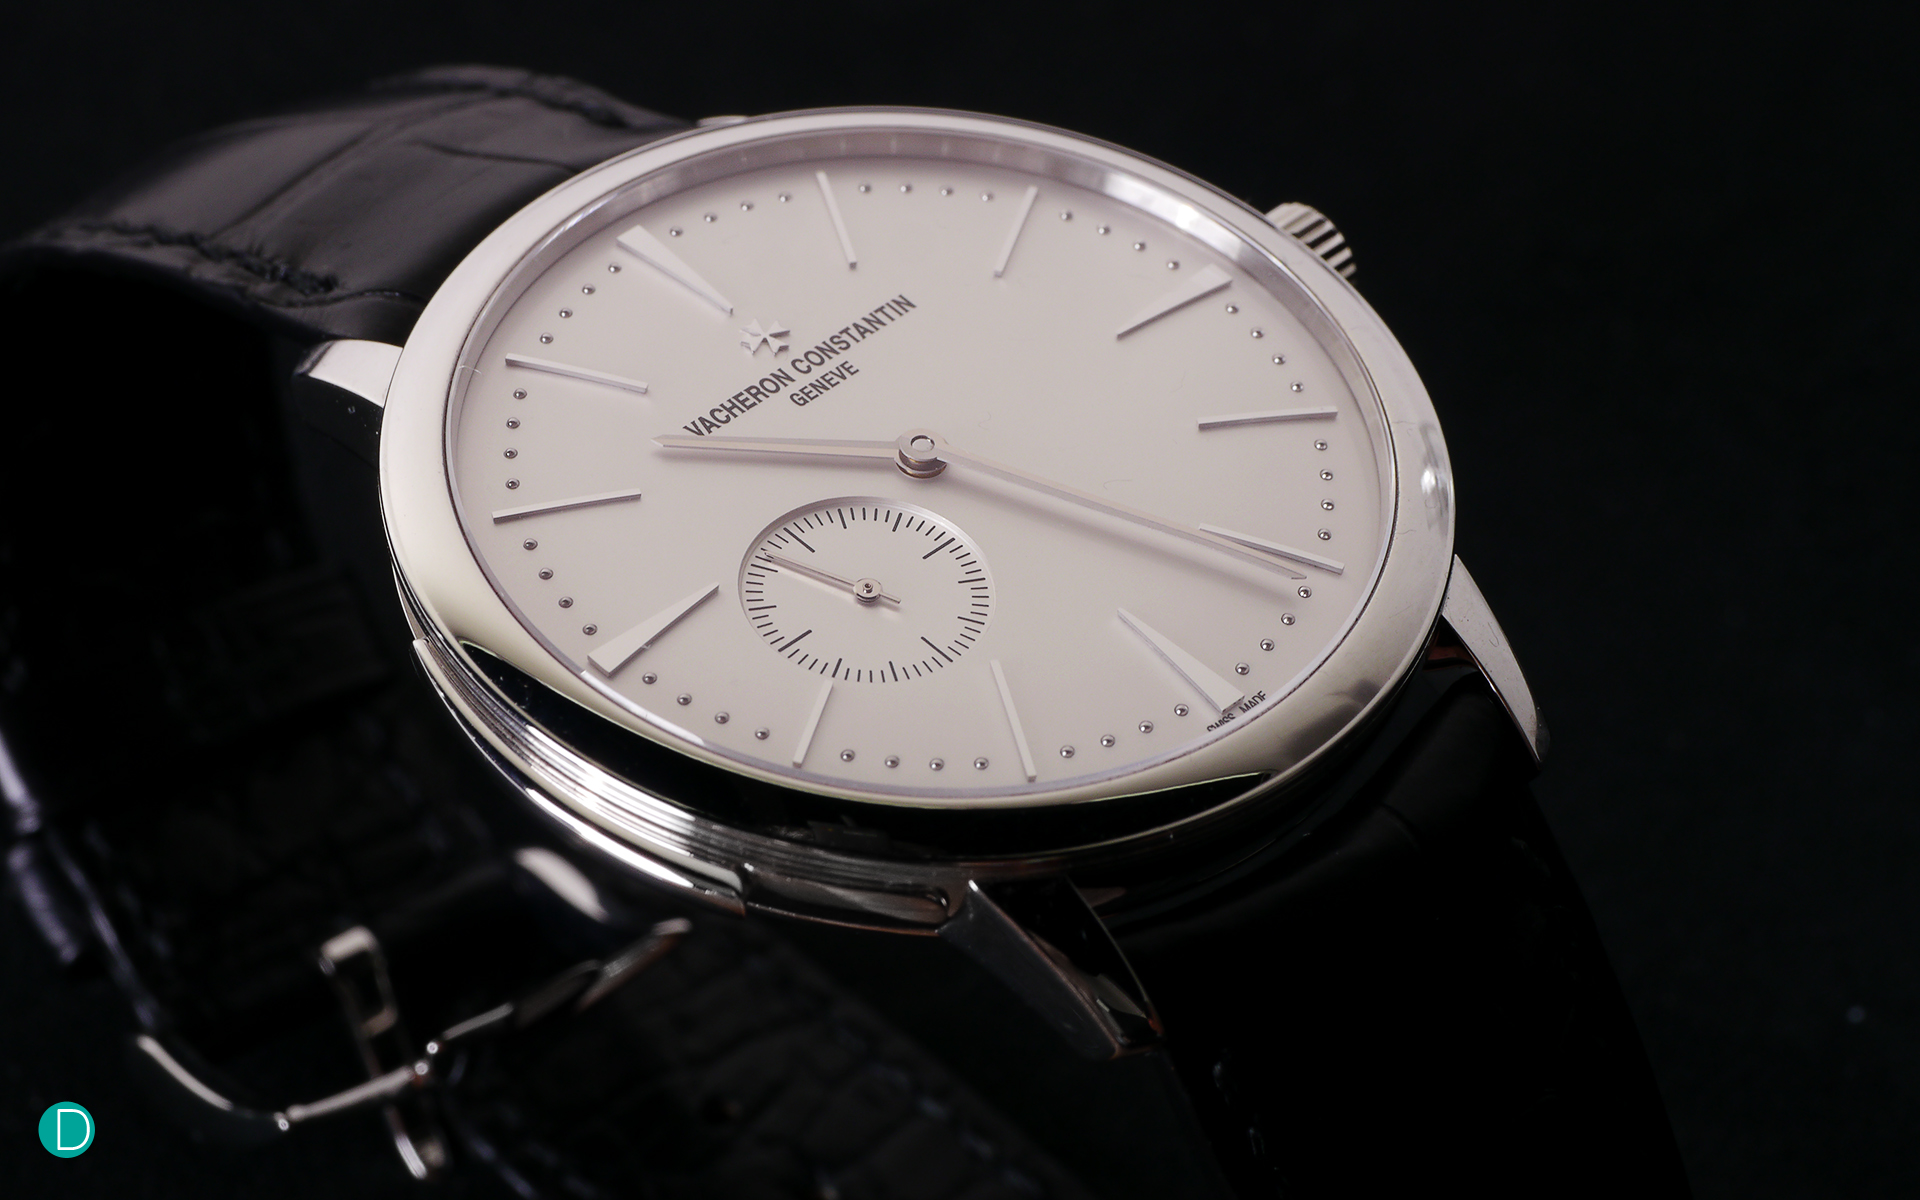 Our favourite VC: The Patrimony Ultra Thin Minute Repeater in platinum.